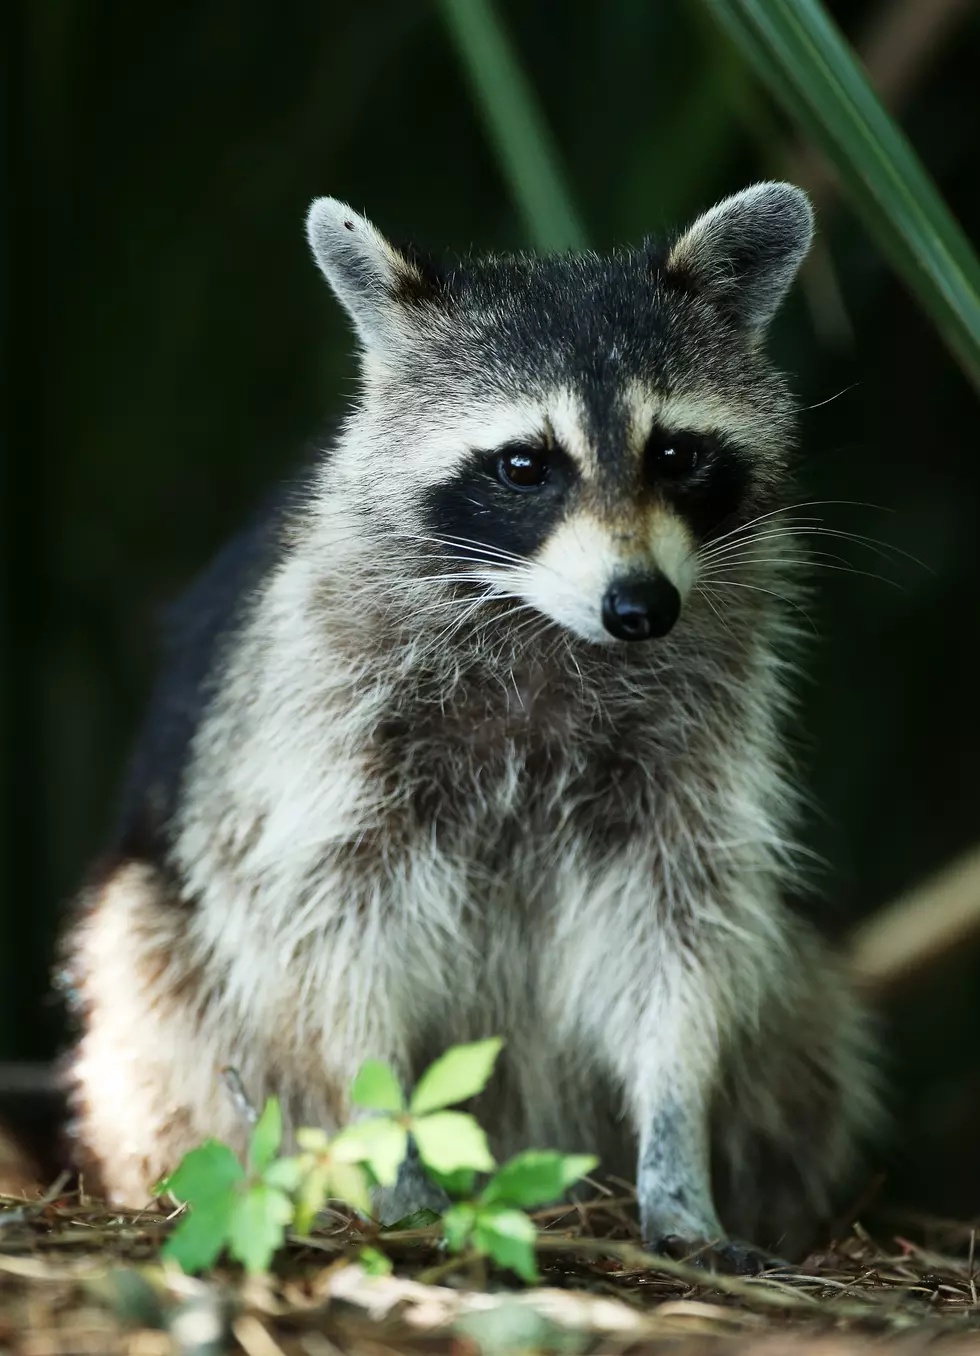 Raccoons Drink An Entire Bowl Of Milk By Sticking Their Heads In It [VIDEO]